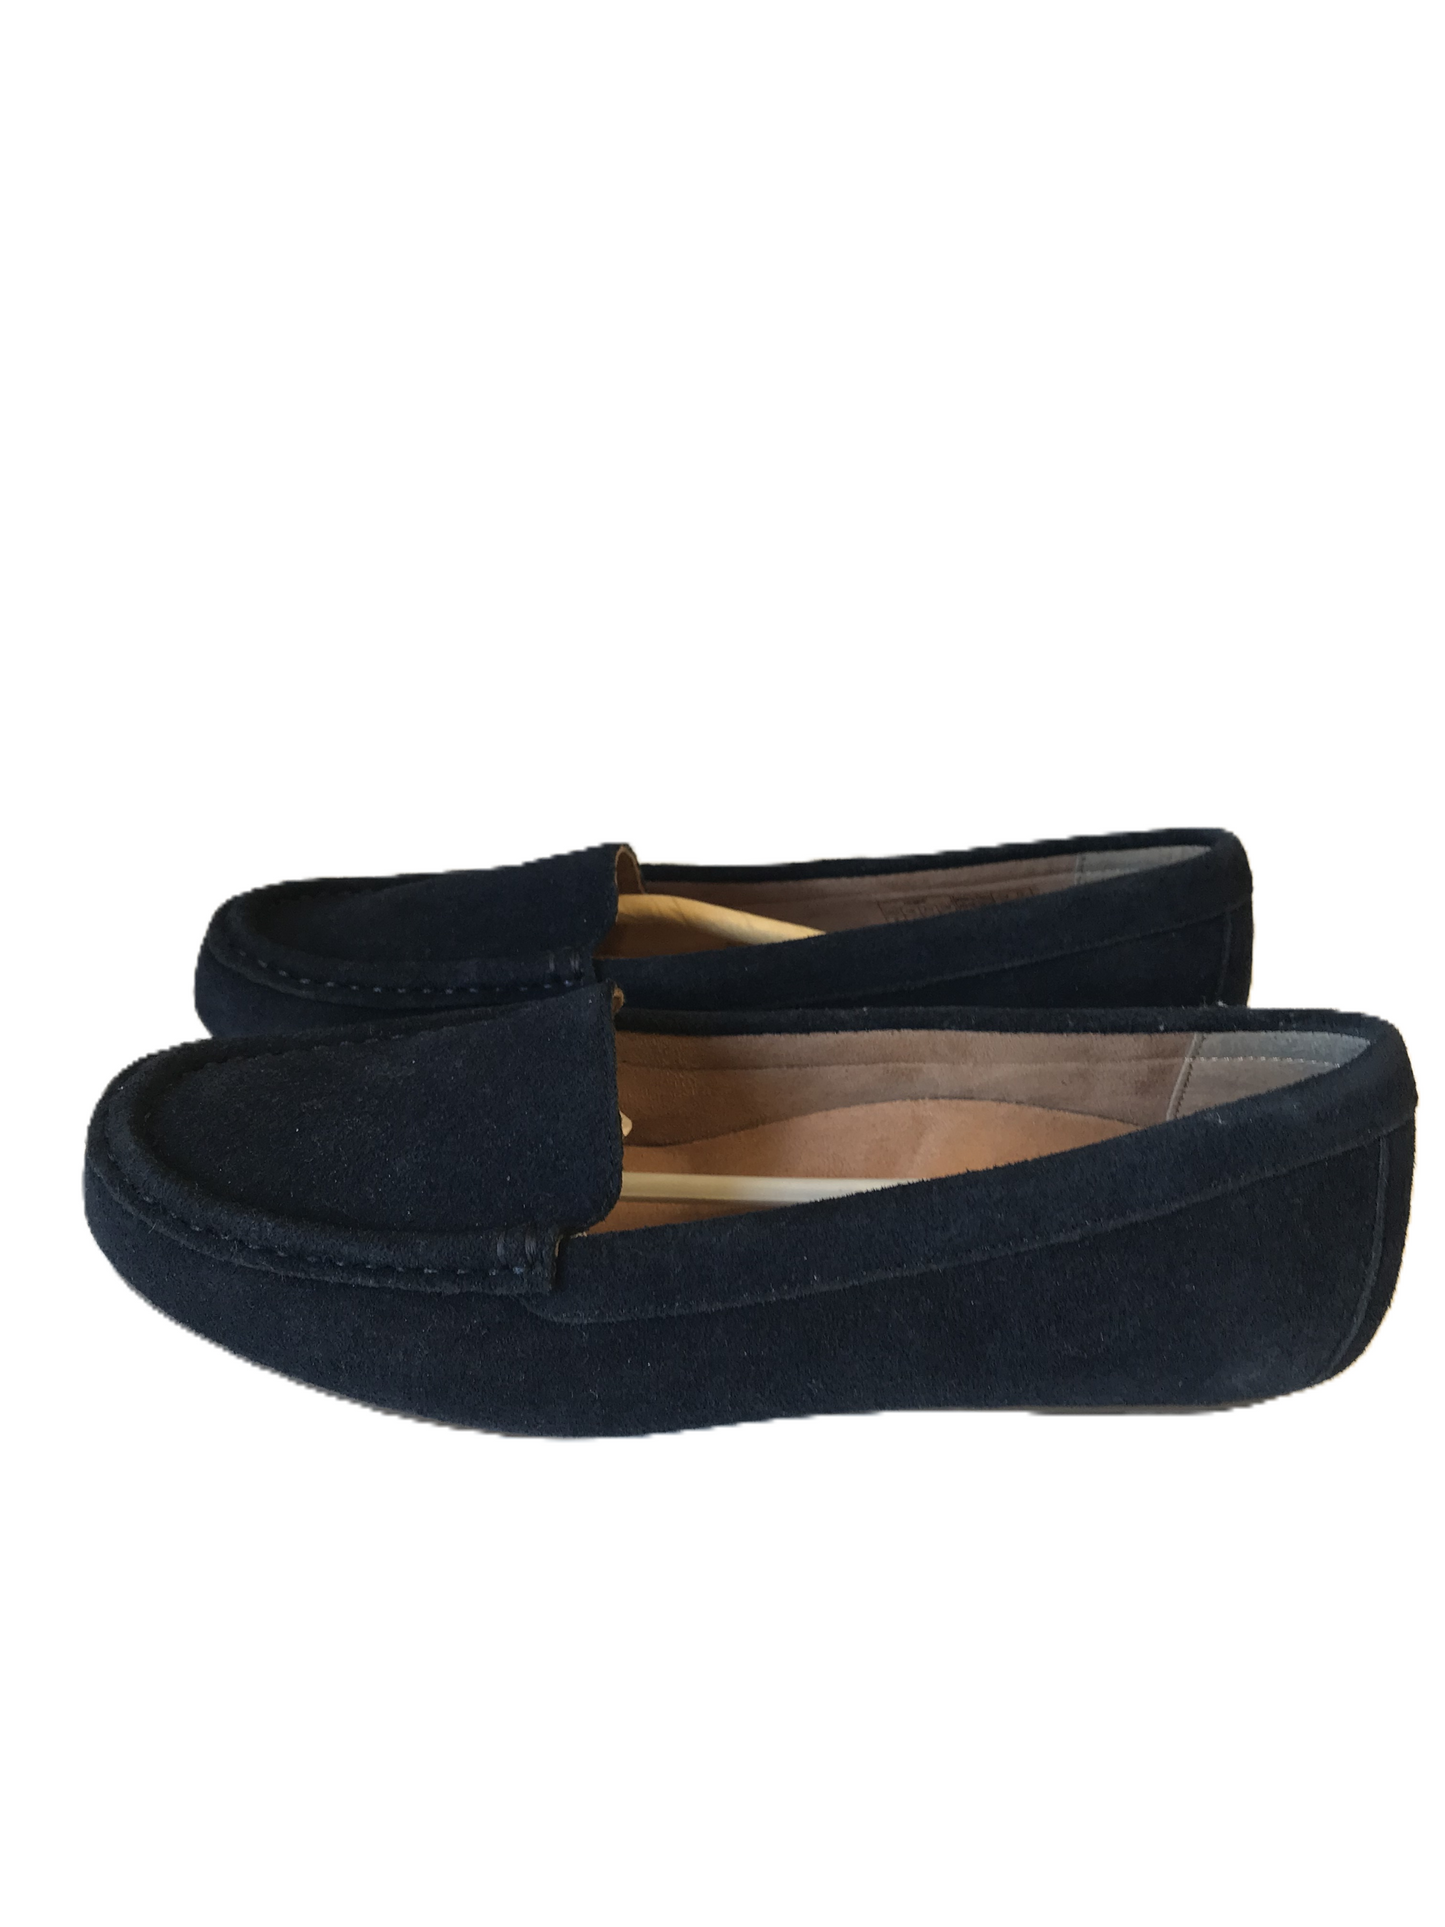 Navy Shoes Flats By Vionic, Size: 8